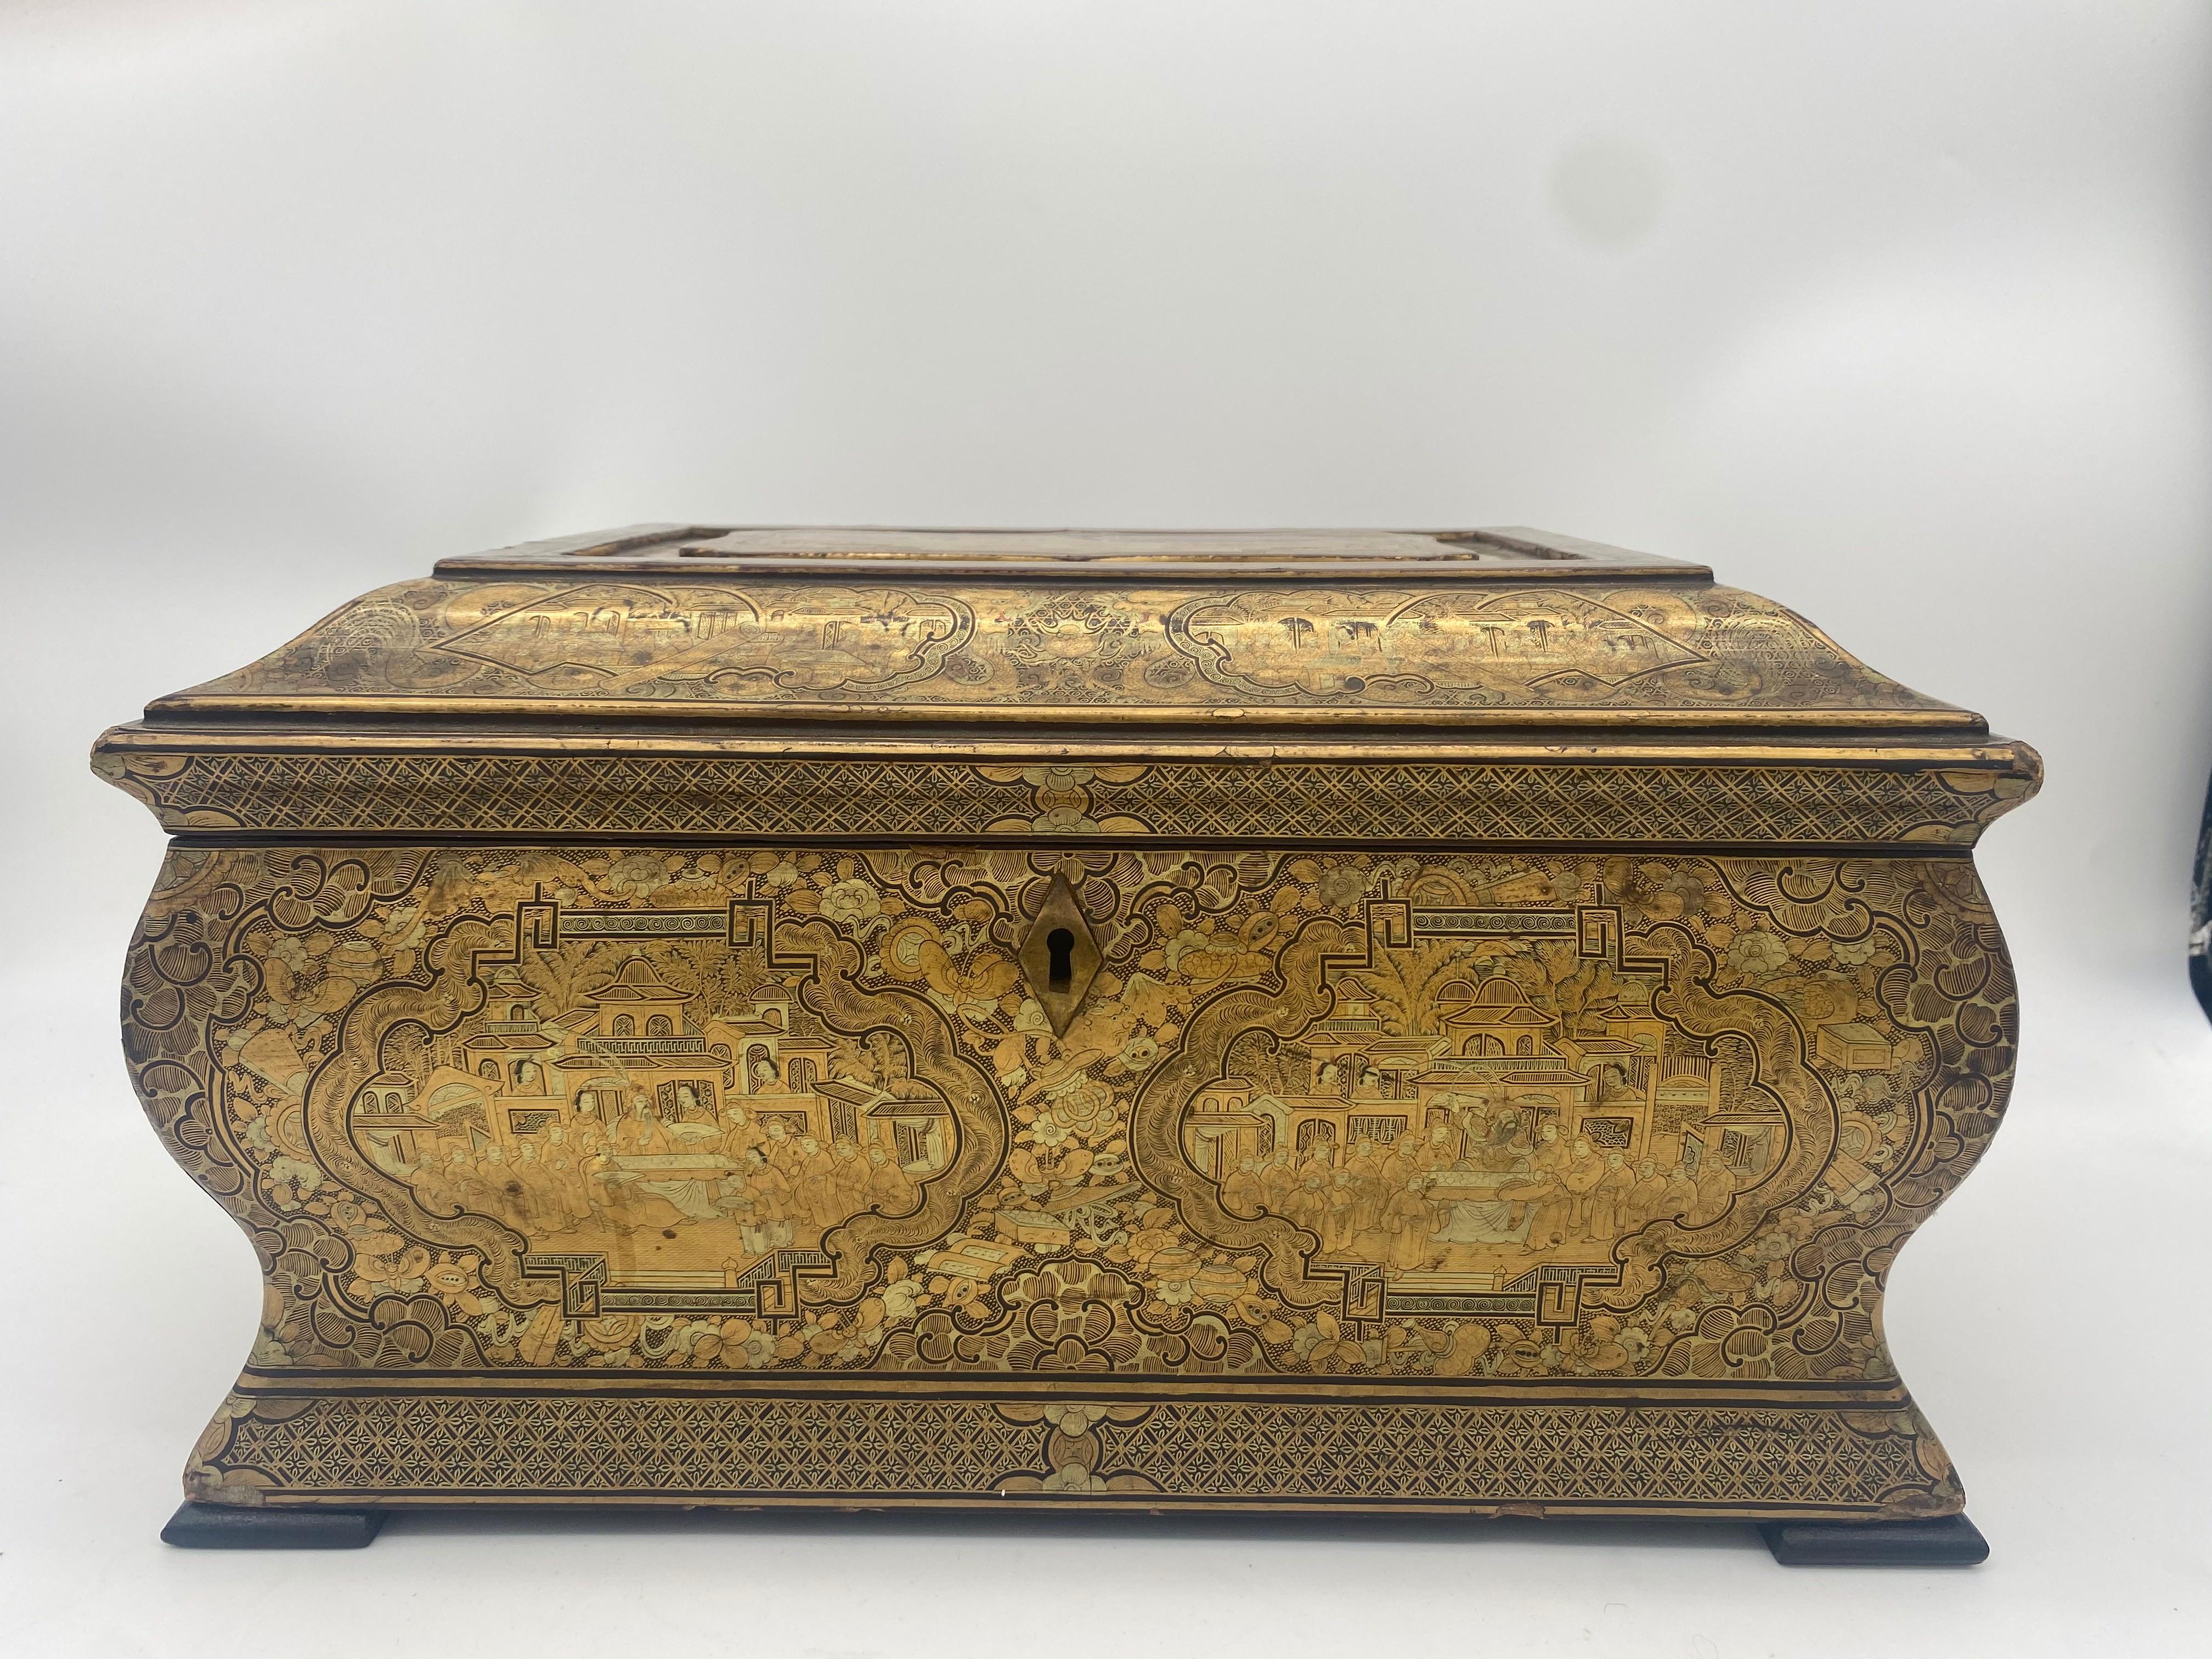 18th or 19th century lift-lid gilt-decorated goldenblack lacquer Chinese tea caddy, the rectangular-section body on a waisted foot and the hinged cover painted with shaped cartouches of figures and architecture on a busy ground of blossoms, foliage